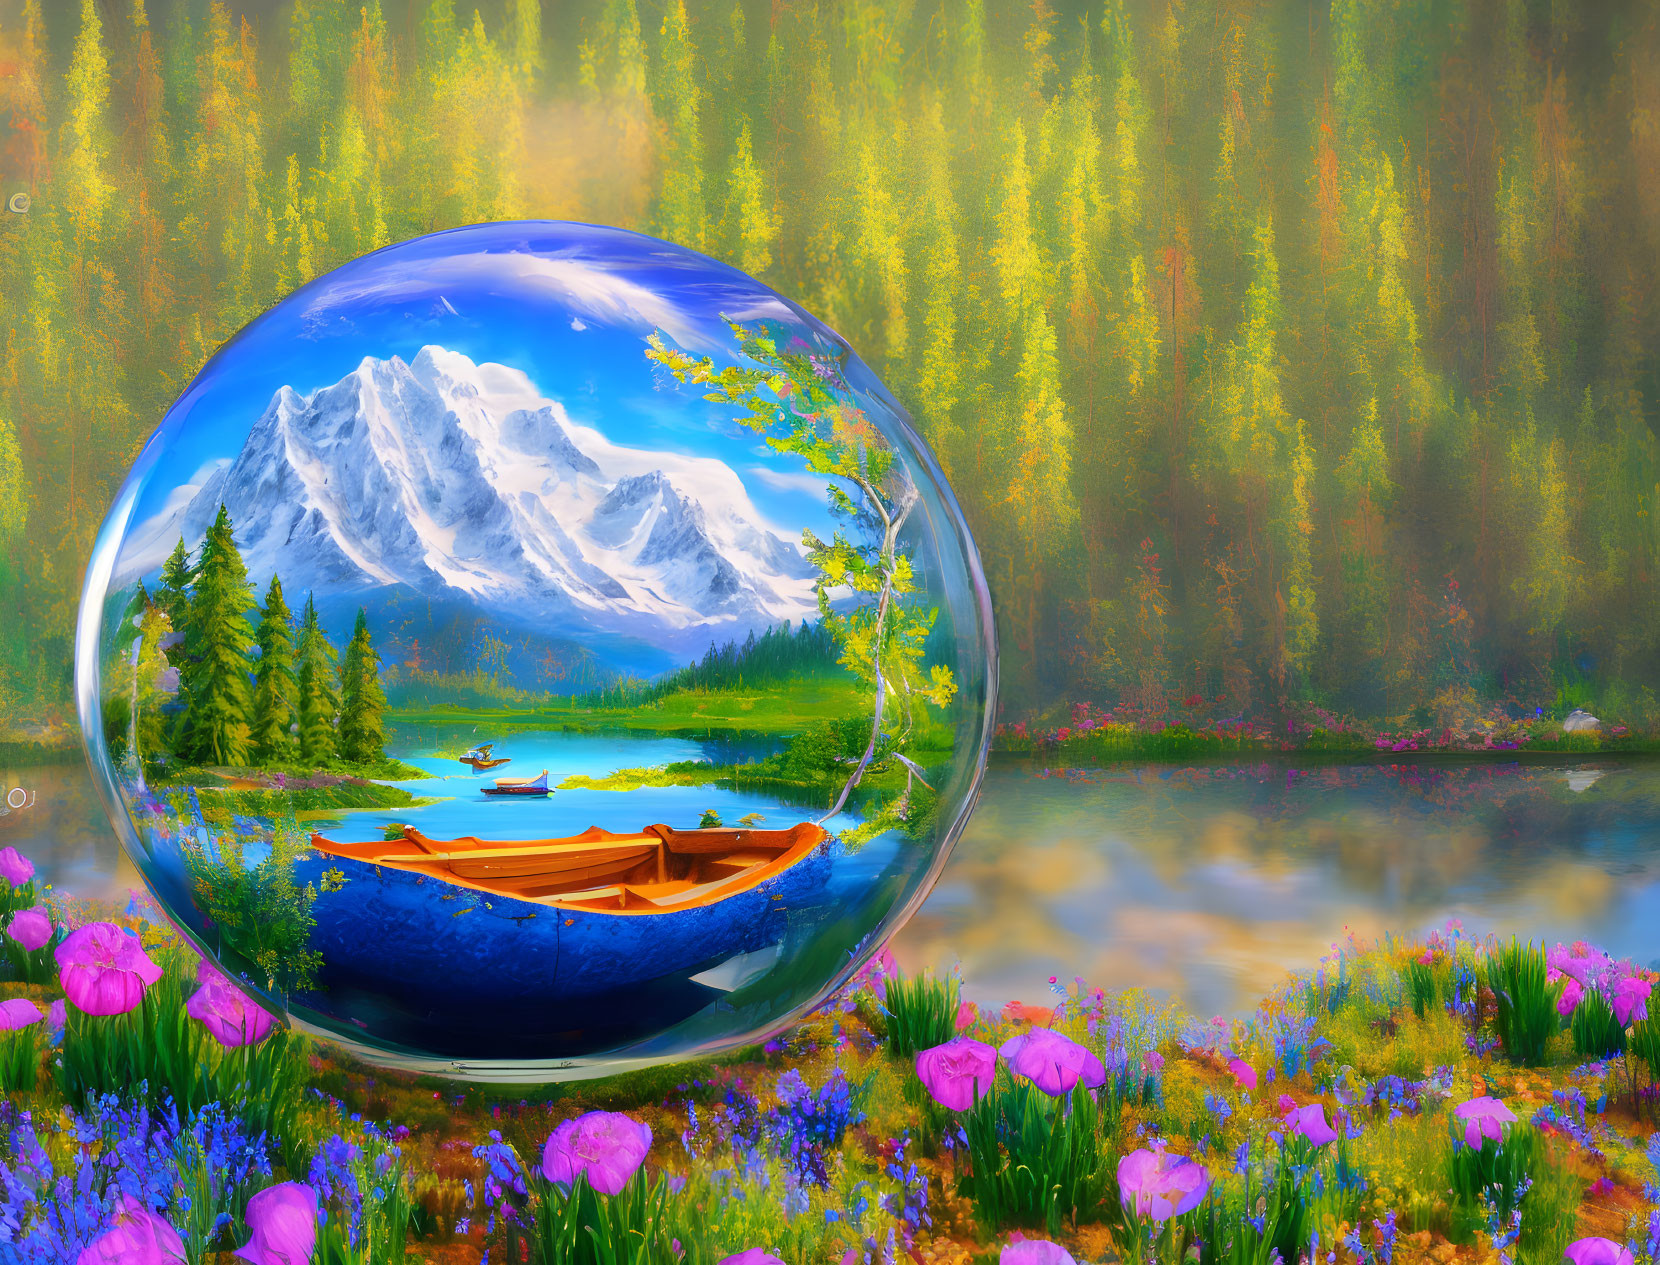 Colorful mountain landscape in transparent sphere with meadow, lake, and boat